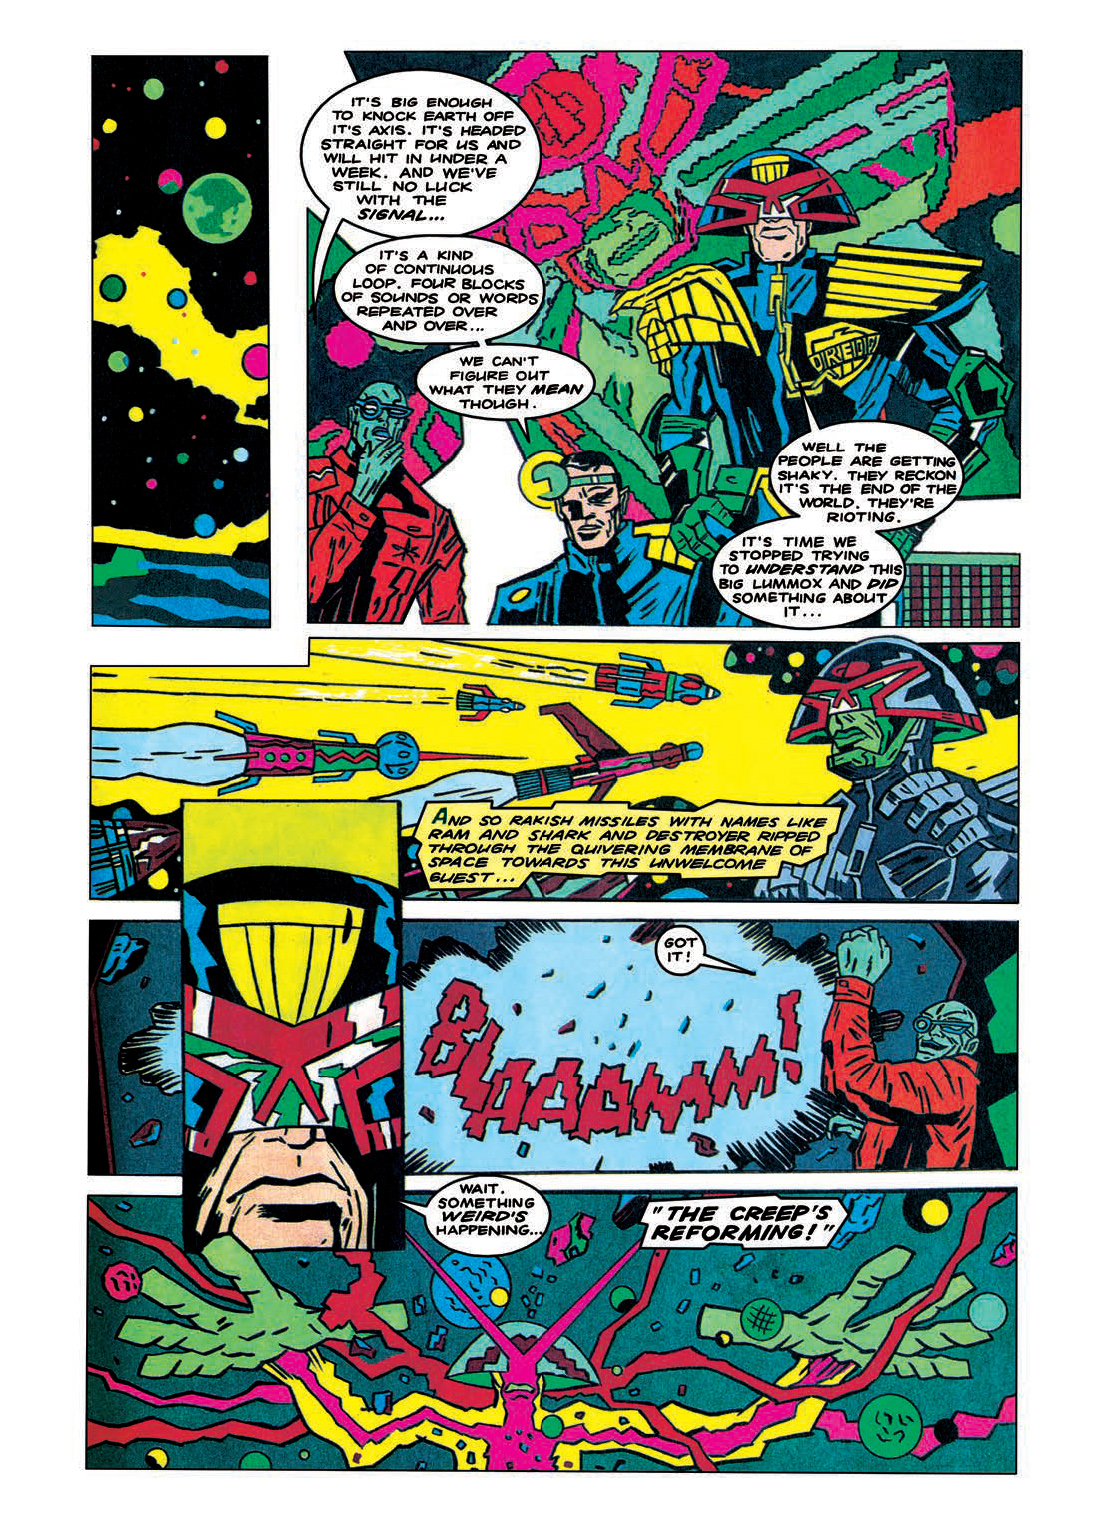 Read online Judge Dredd: The Restricted Files comic -  Issue # TPB 3 - 97